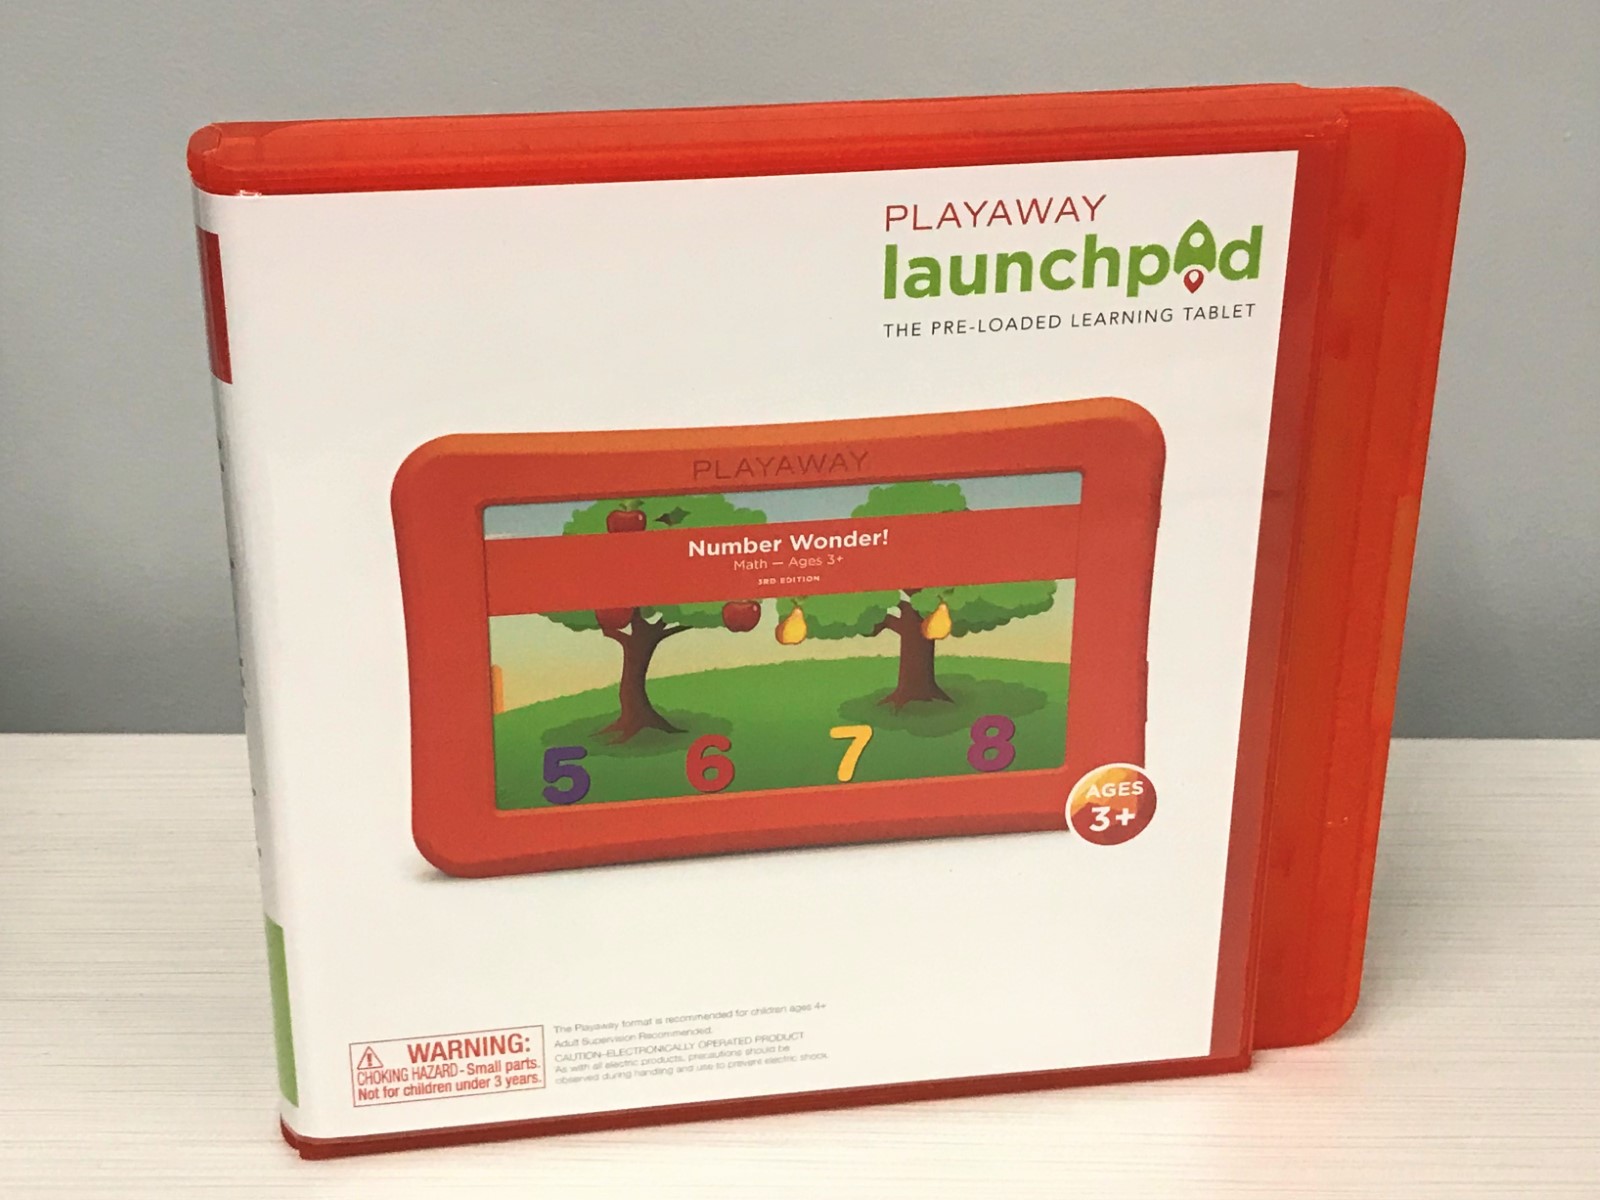 Case for Launchpad: Number Wonder!